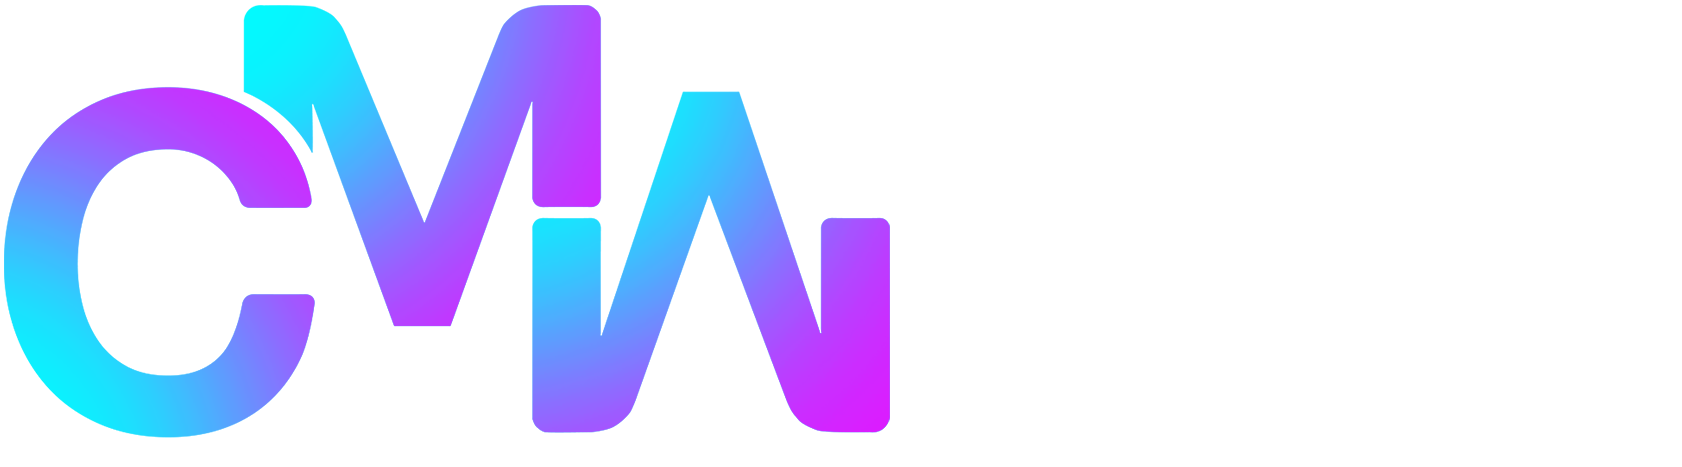 CMW presents Live Music Industry Awards